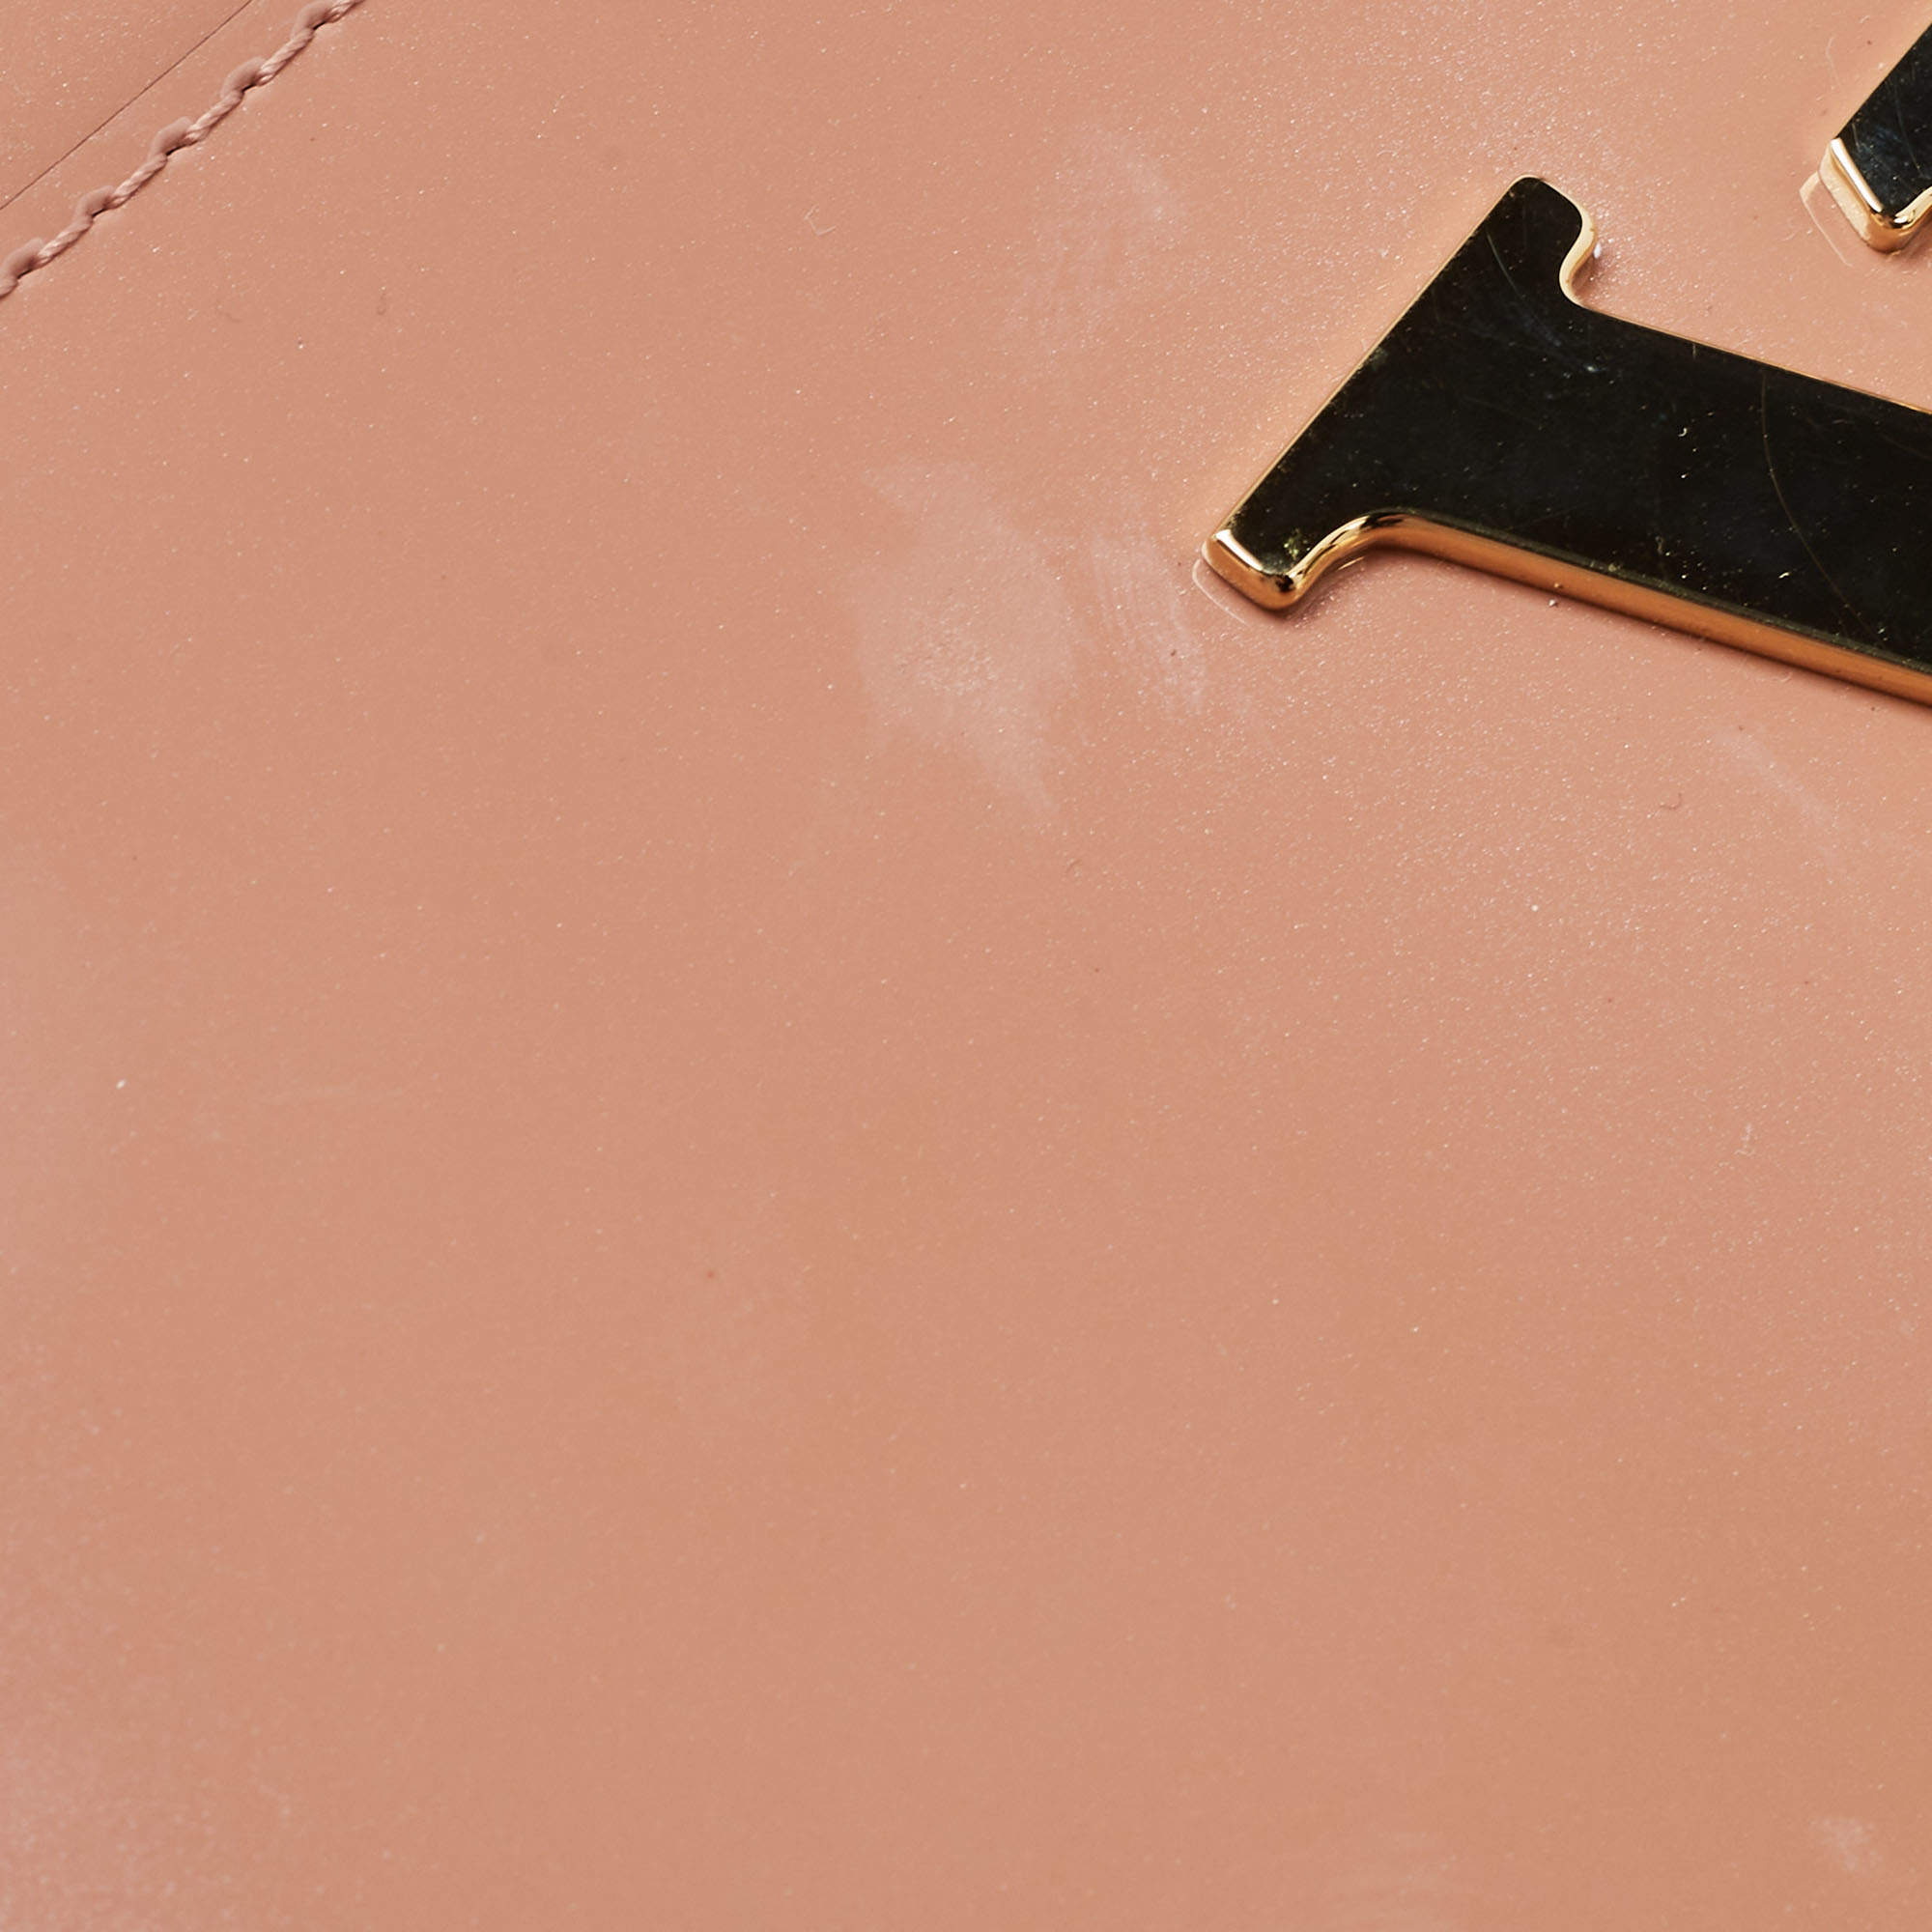 LV Nude Patent Leather Louise ew clutch – The Closet